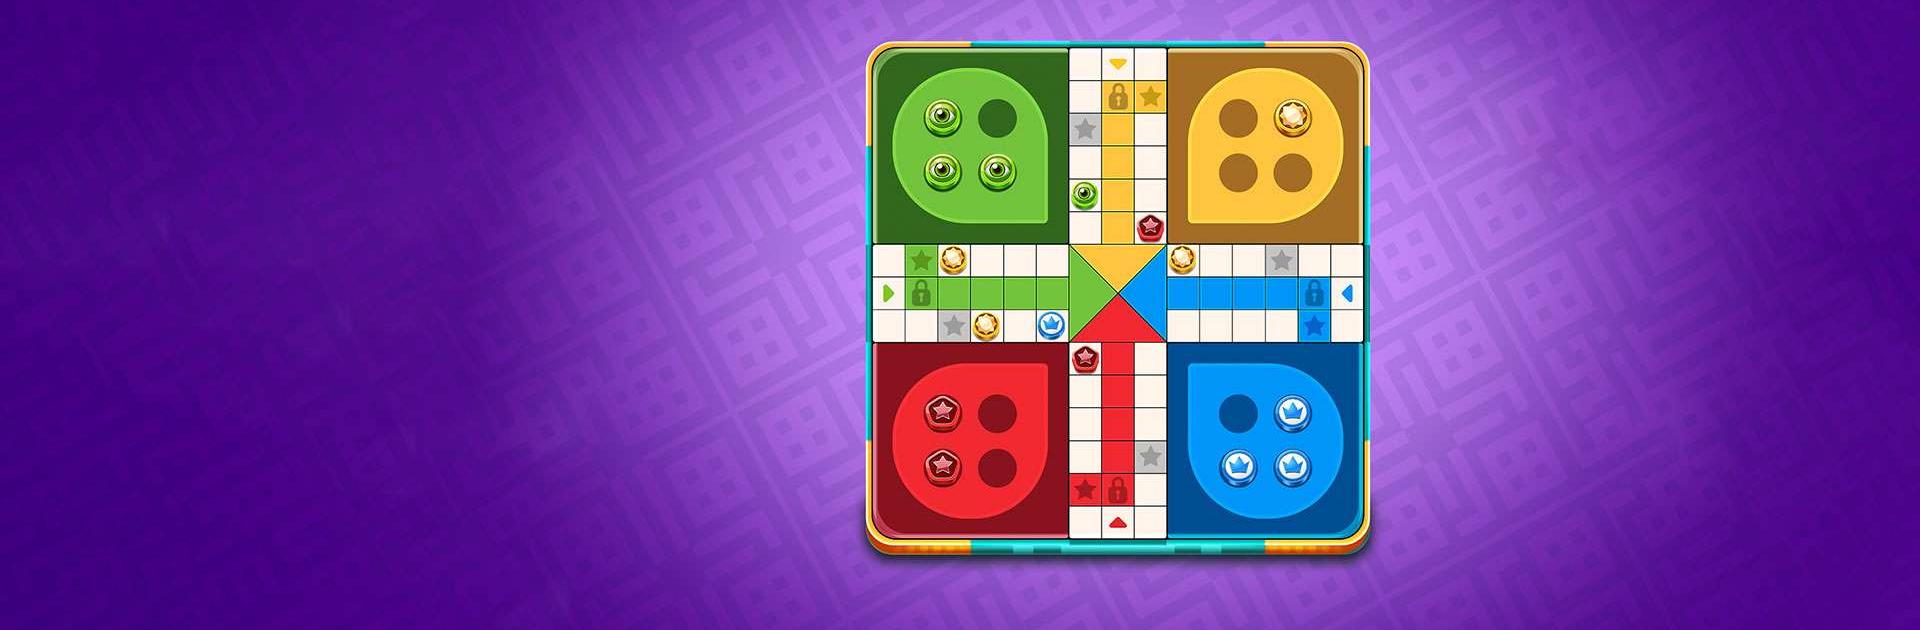 Play Ludo Party Dice Board Game Online for Free on PC and Mobile now.gg